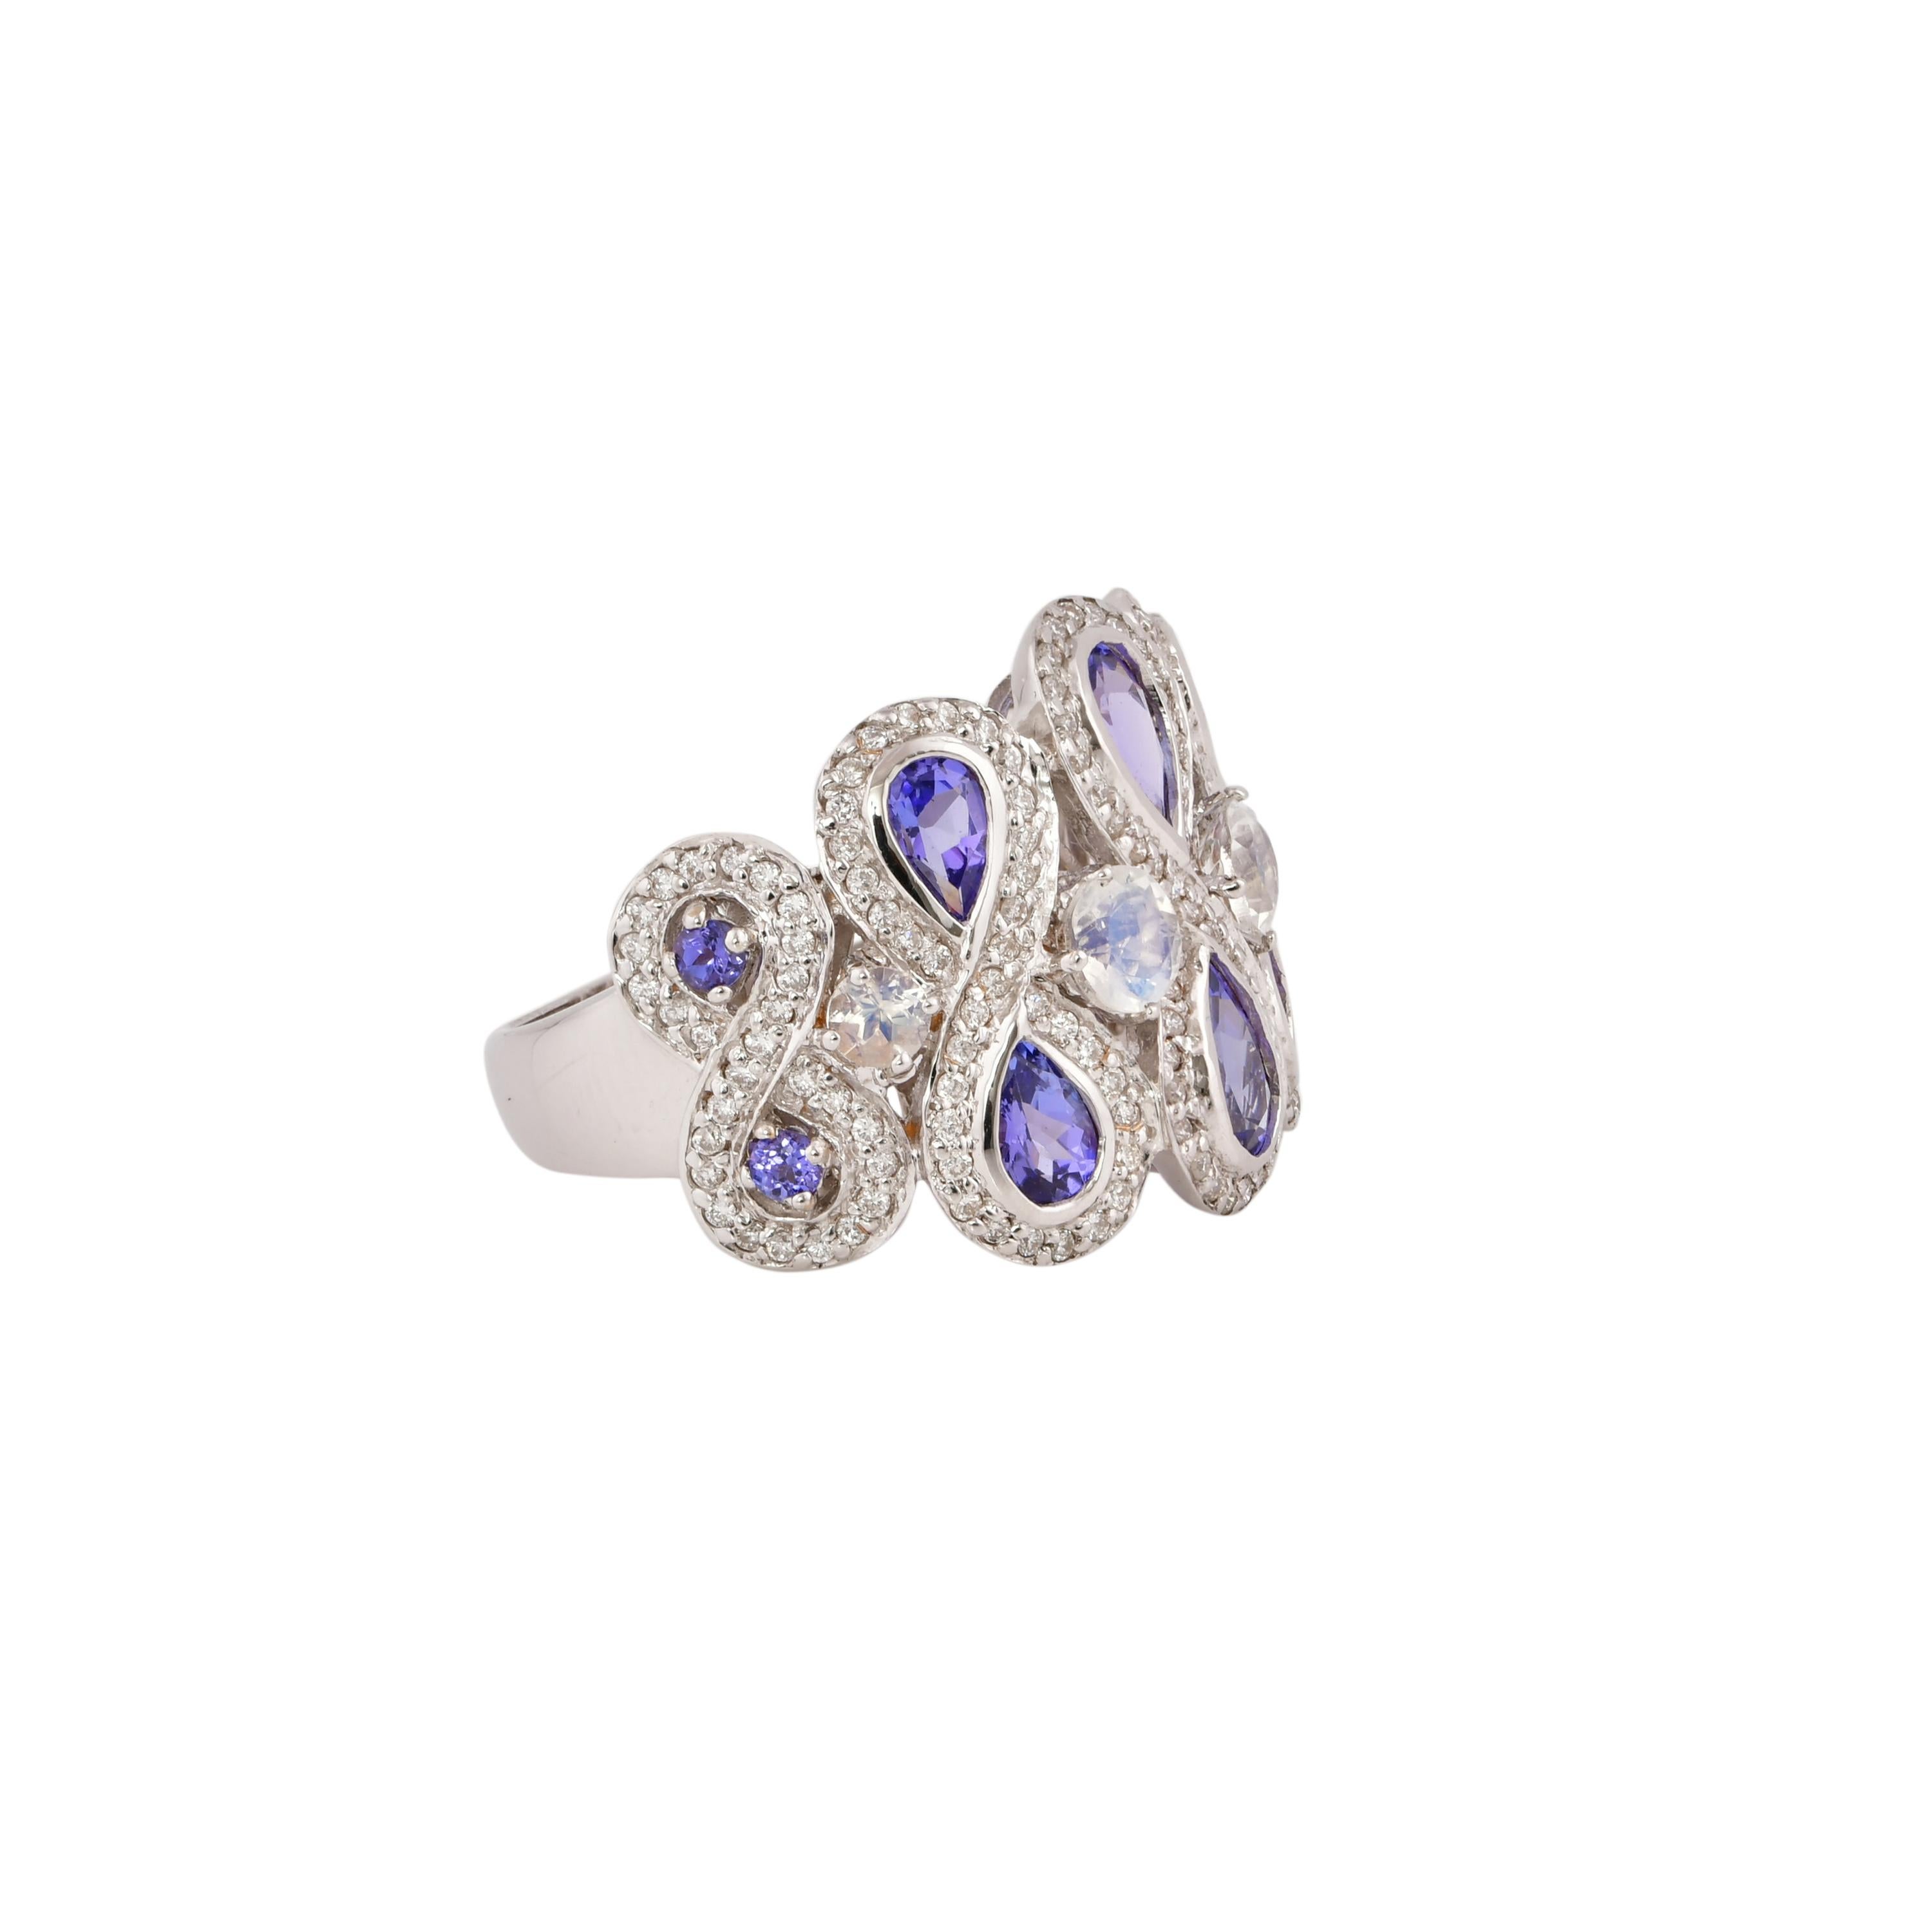 Sunita Nahata presents a collection of fancy cocktail rings with gorgeous gemstones. This ring uniquely pairs tanzanites with blue moonstones. The banded design makes the a striking yet subtle cocktail ring that will definitely have heads turning.